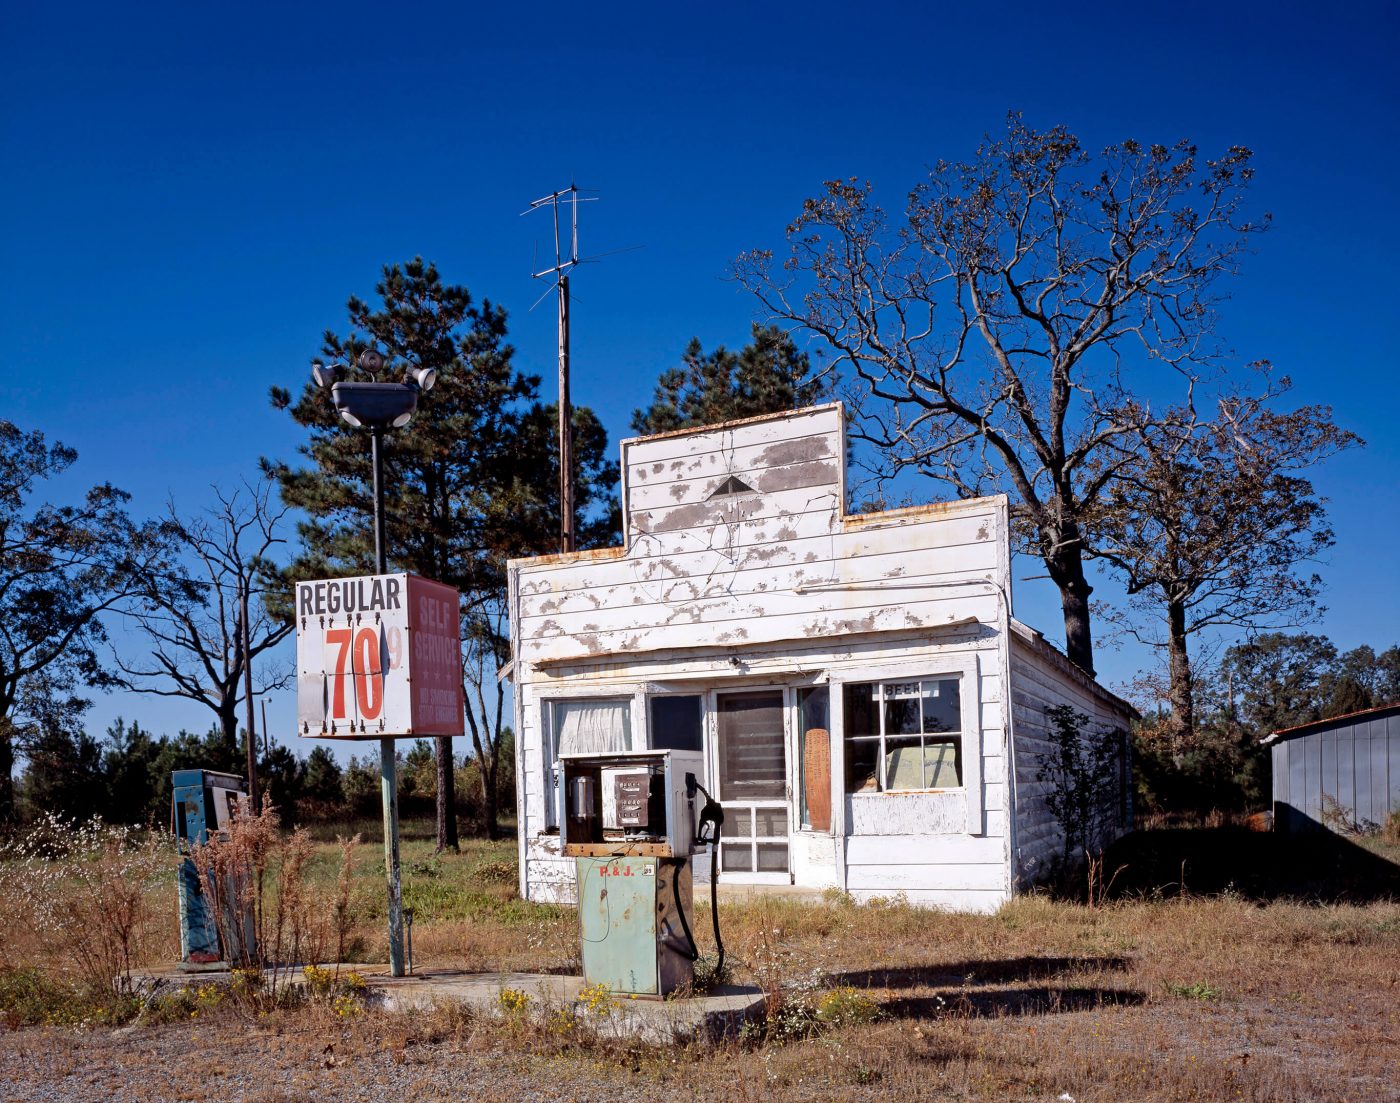 Long “out of gas” applies to this old station in North Carolina.